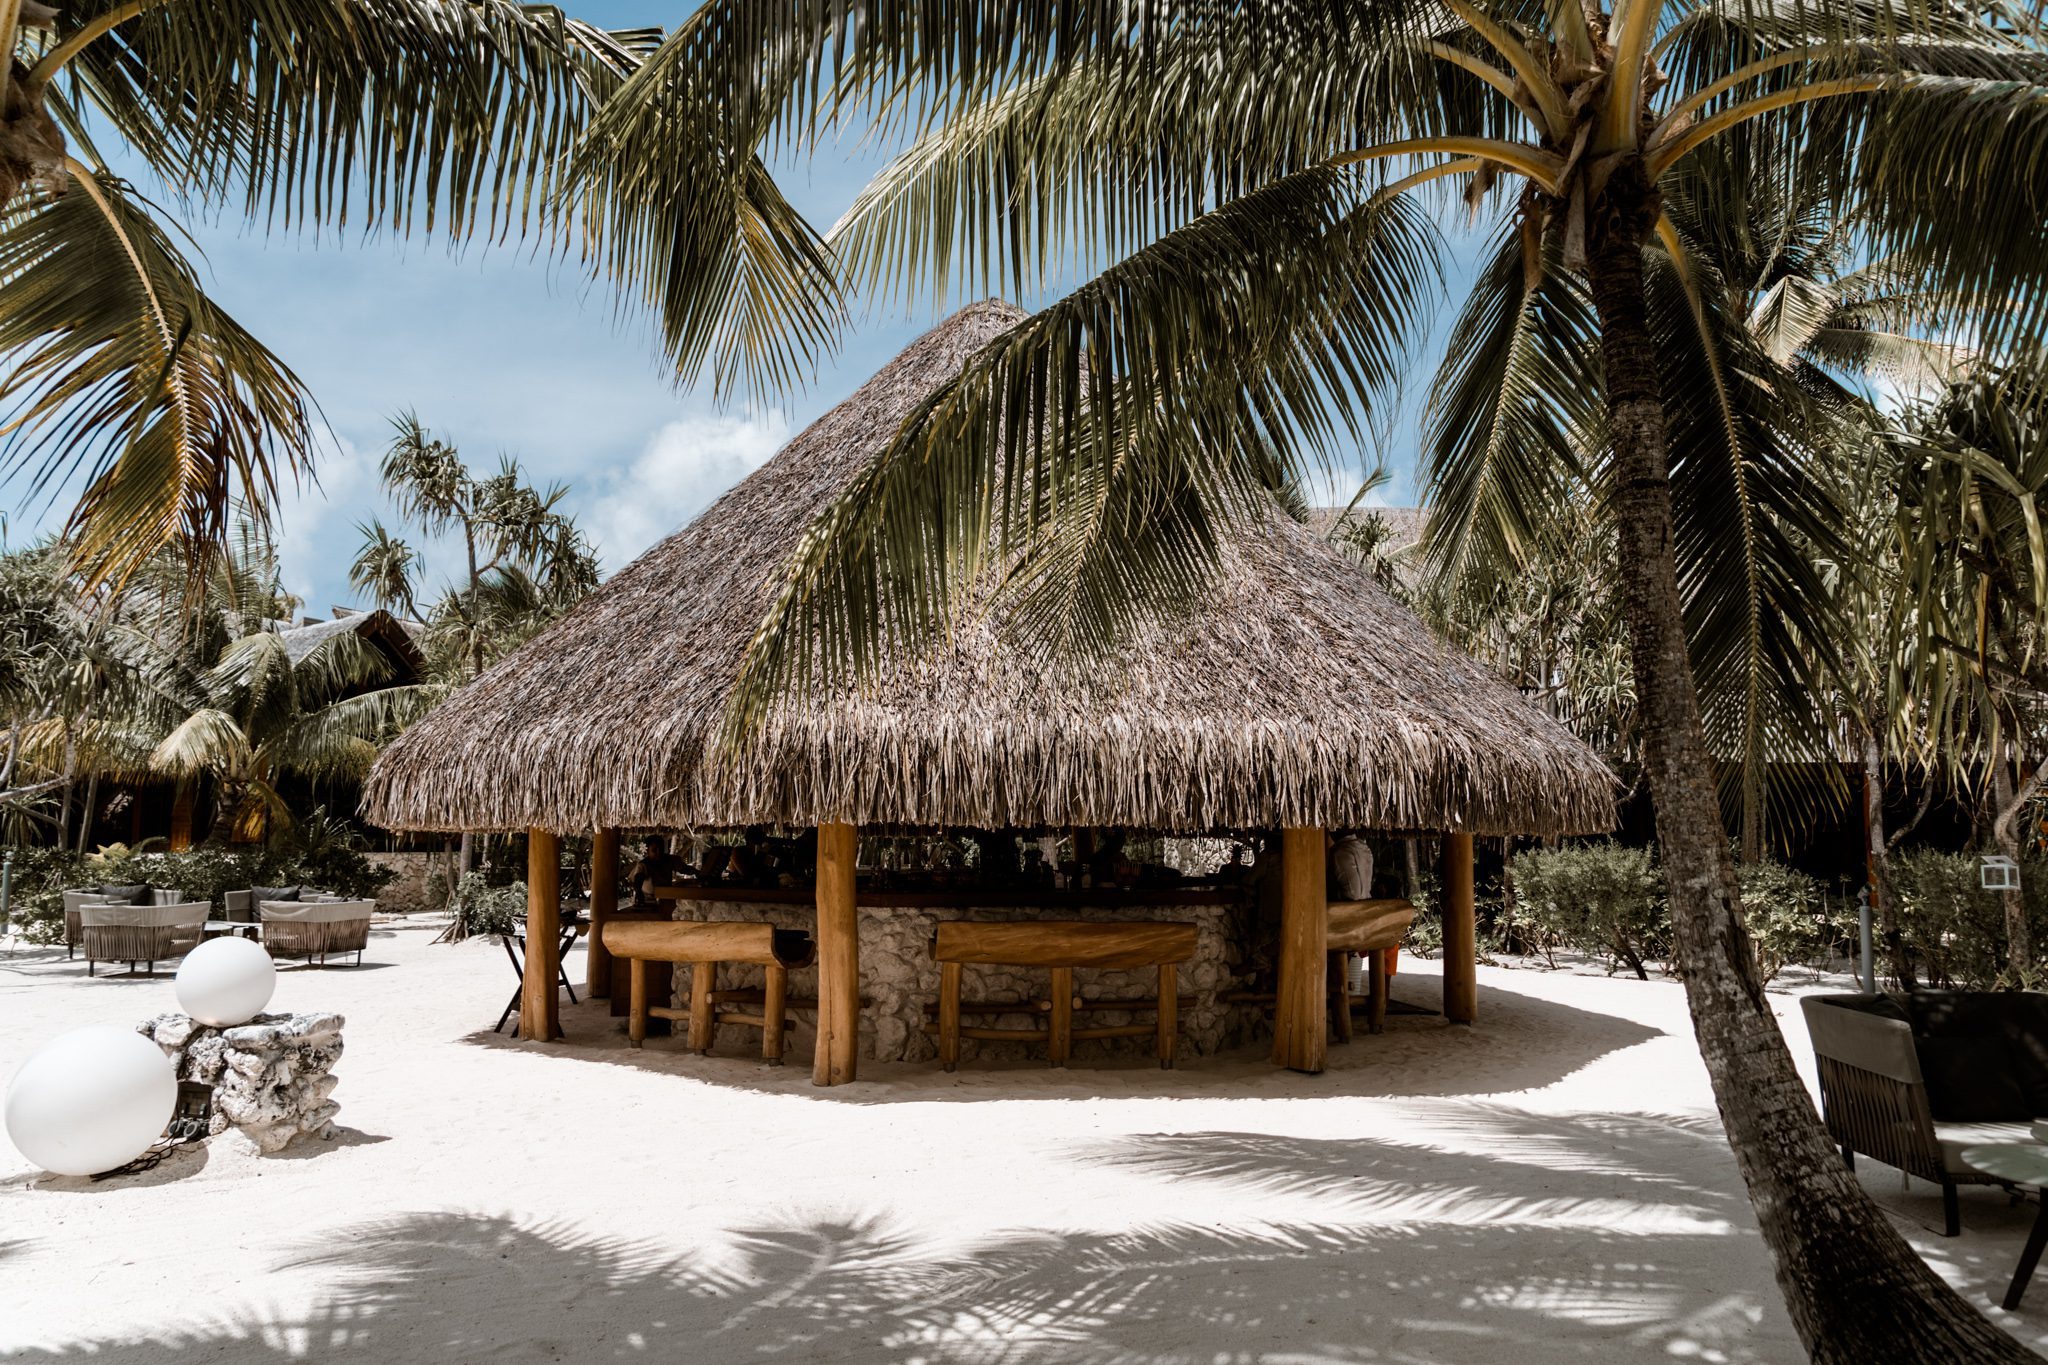 Outdoor bar with a thatched roof at our all inclusive Tahiti resort